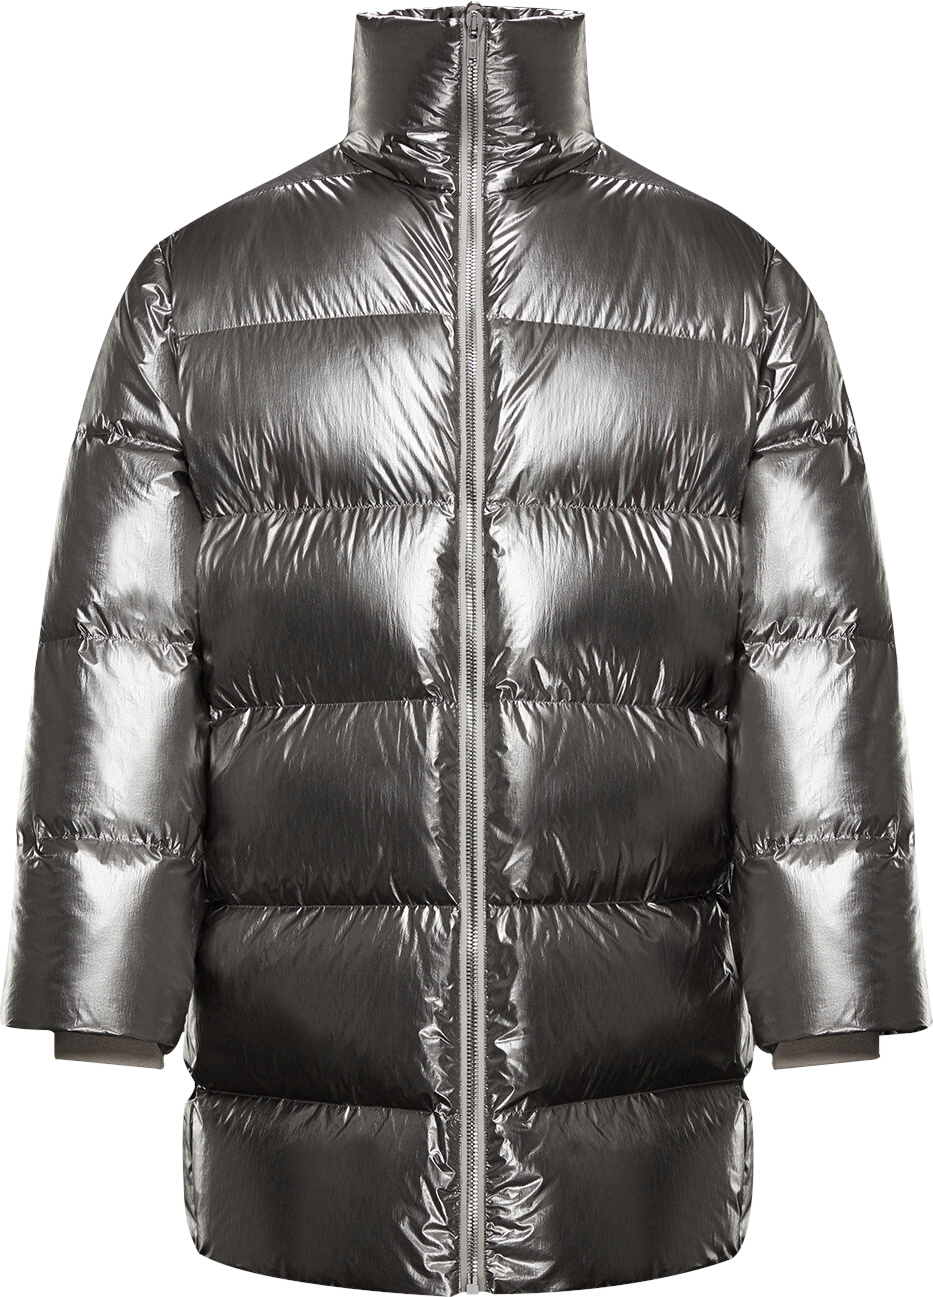 Moncler x Rick Owens Silver 'Cyclopic' Puffer Jacket | Incorporated Style